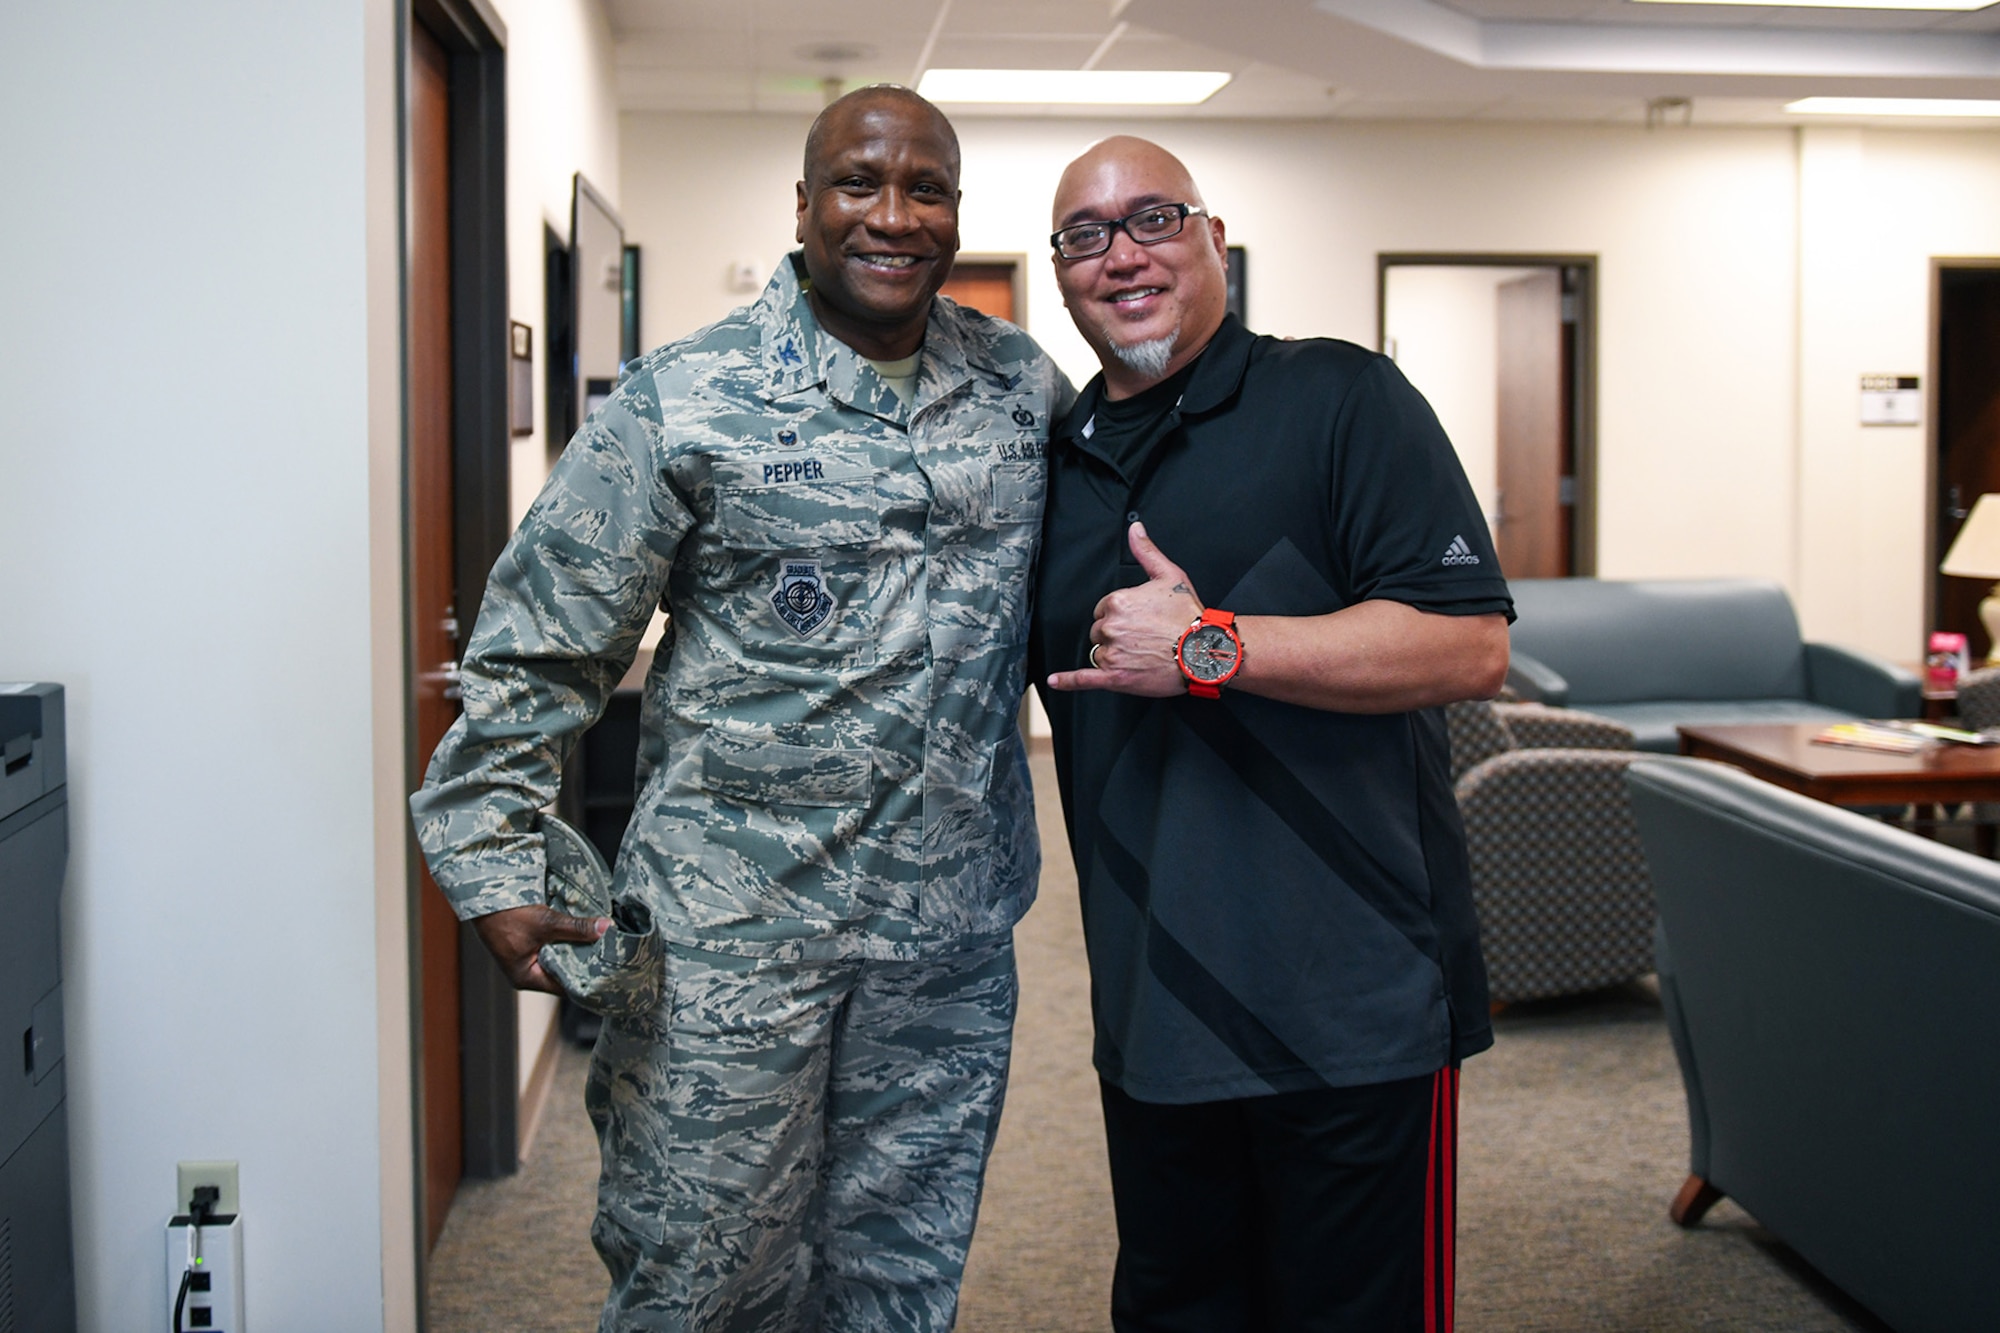 Col. Devin Pepper, 460th Space Wing commander, and Alan Muriera, 460th Medical Group health promotion manager, pose for a photo, March 5, 2020, at the Human Performance Center at Buckley Air Force Base, Colo.